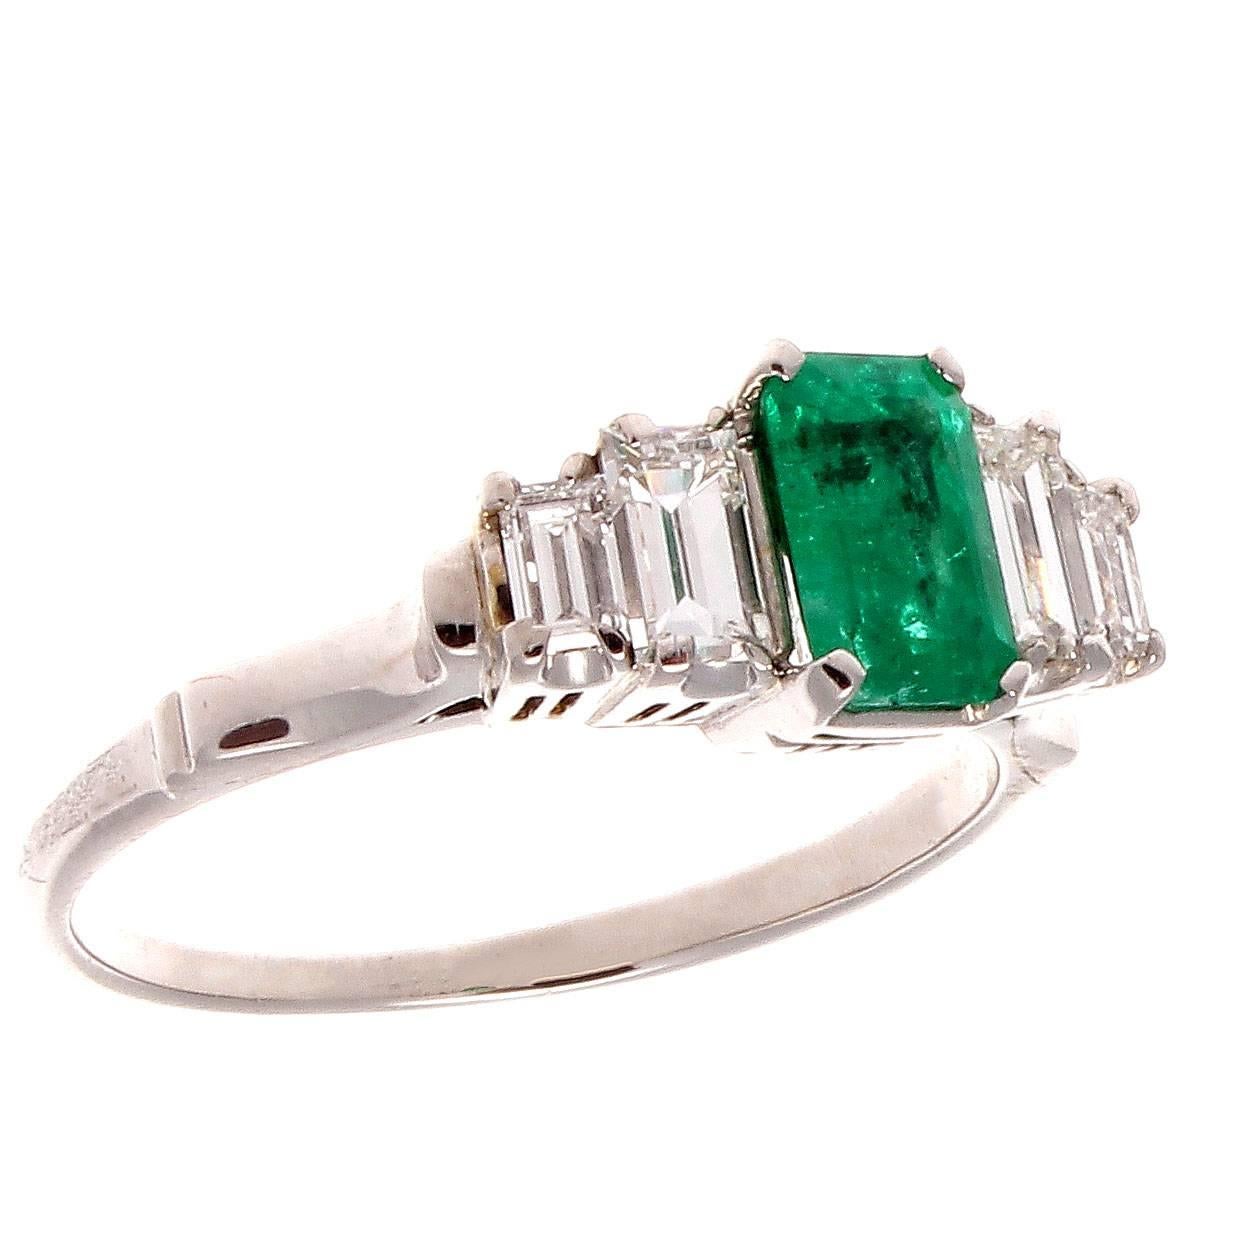 Color is the focus of this modern engagement ring. Featuring a 0.70 carat Colombian forest green emerald accented by emerald cut diamonds weighing approximately 0.50 carats that are F color, VS1 clarity. Crafted in platinum.

Ring size 6 and may be